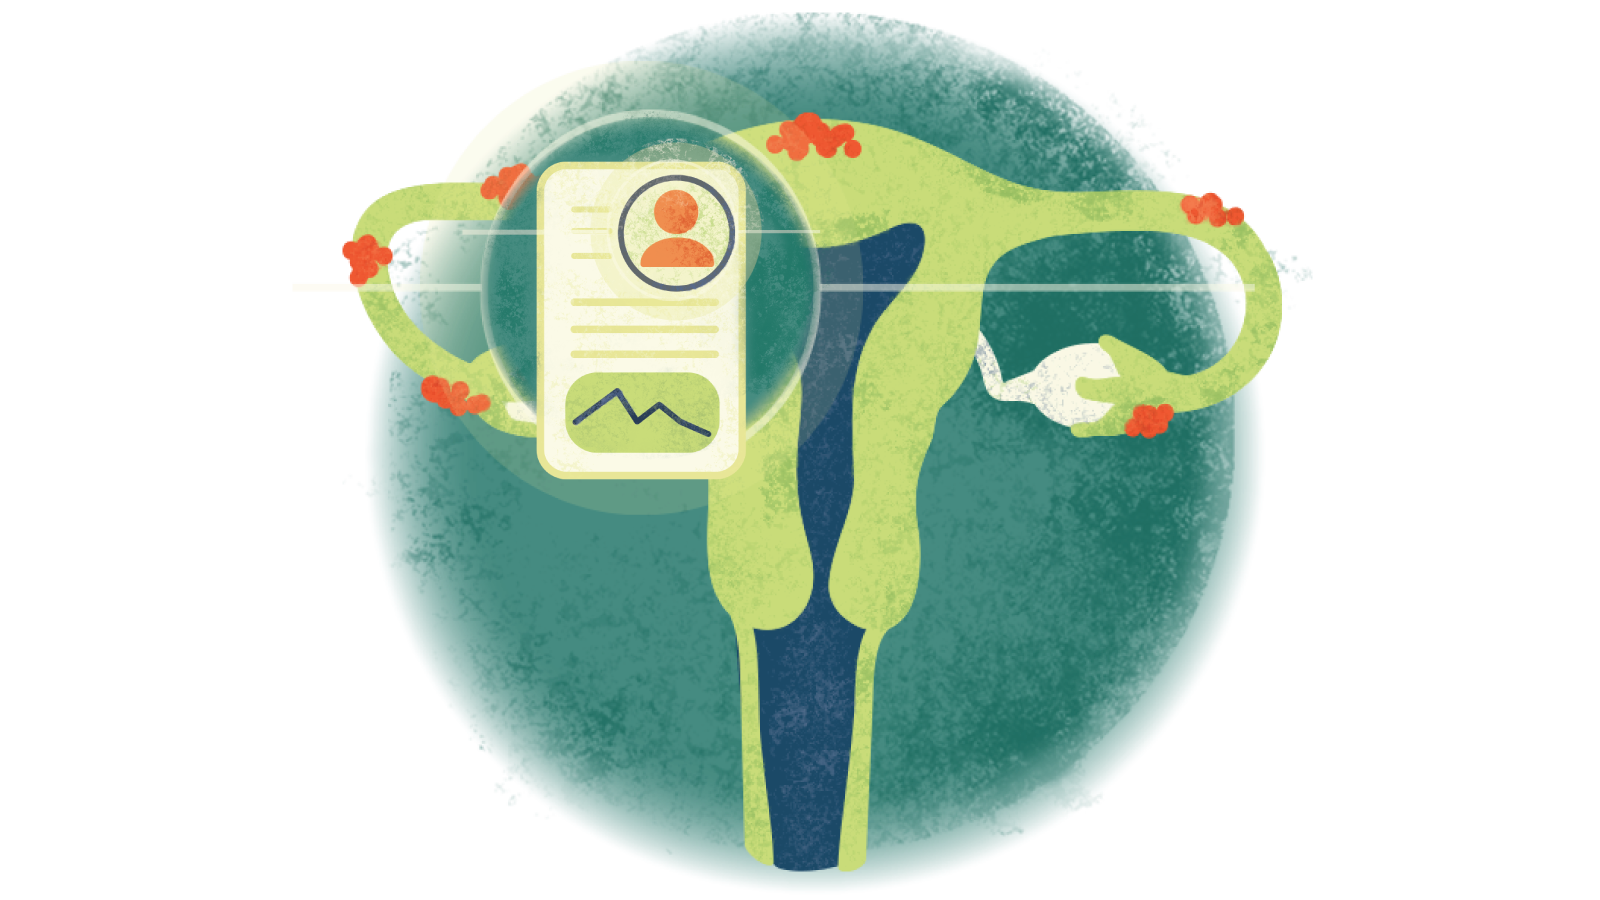 Illustration of a written case study over a uterus with endometriosis